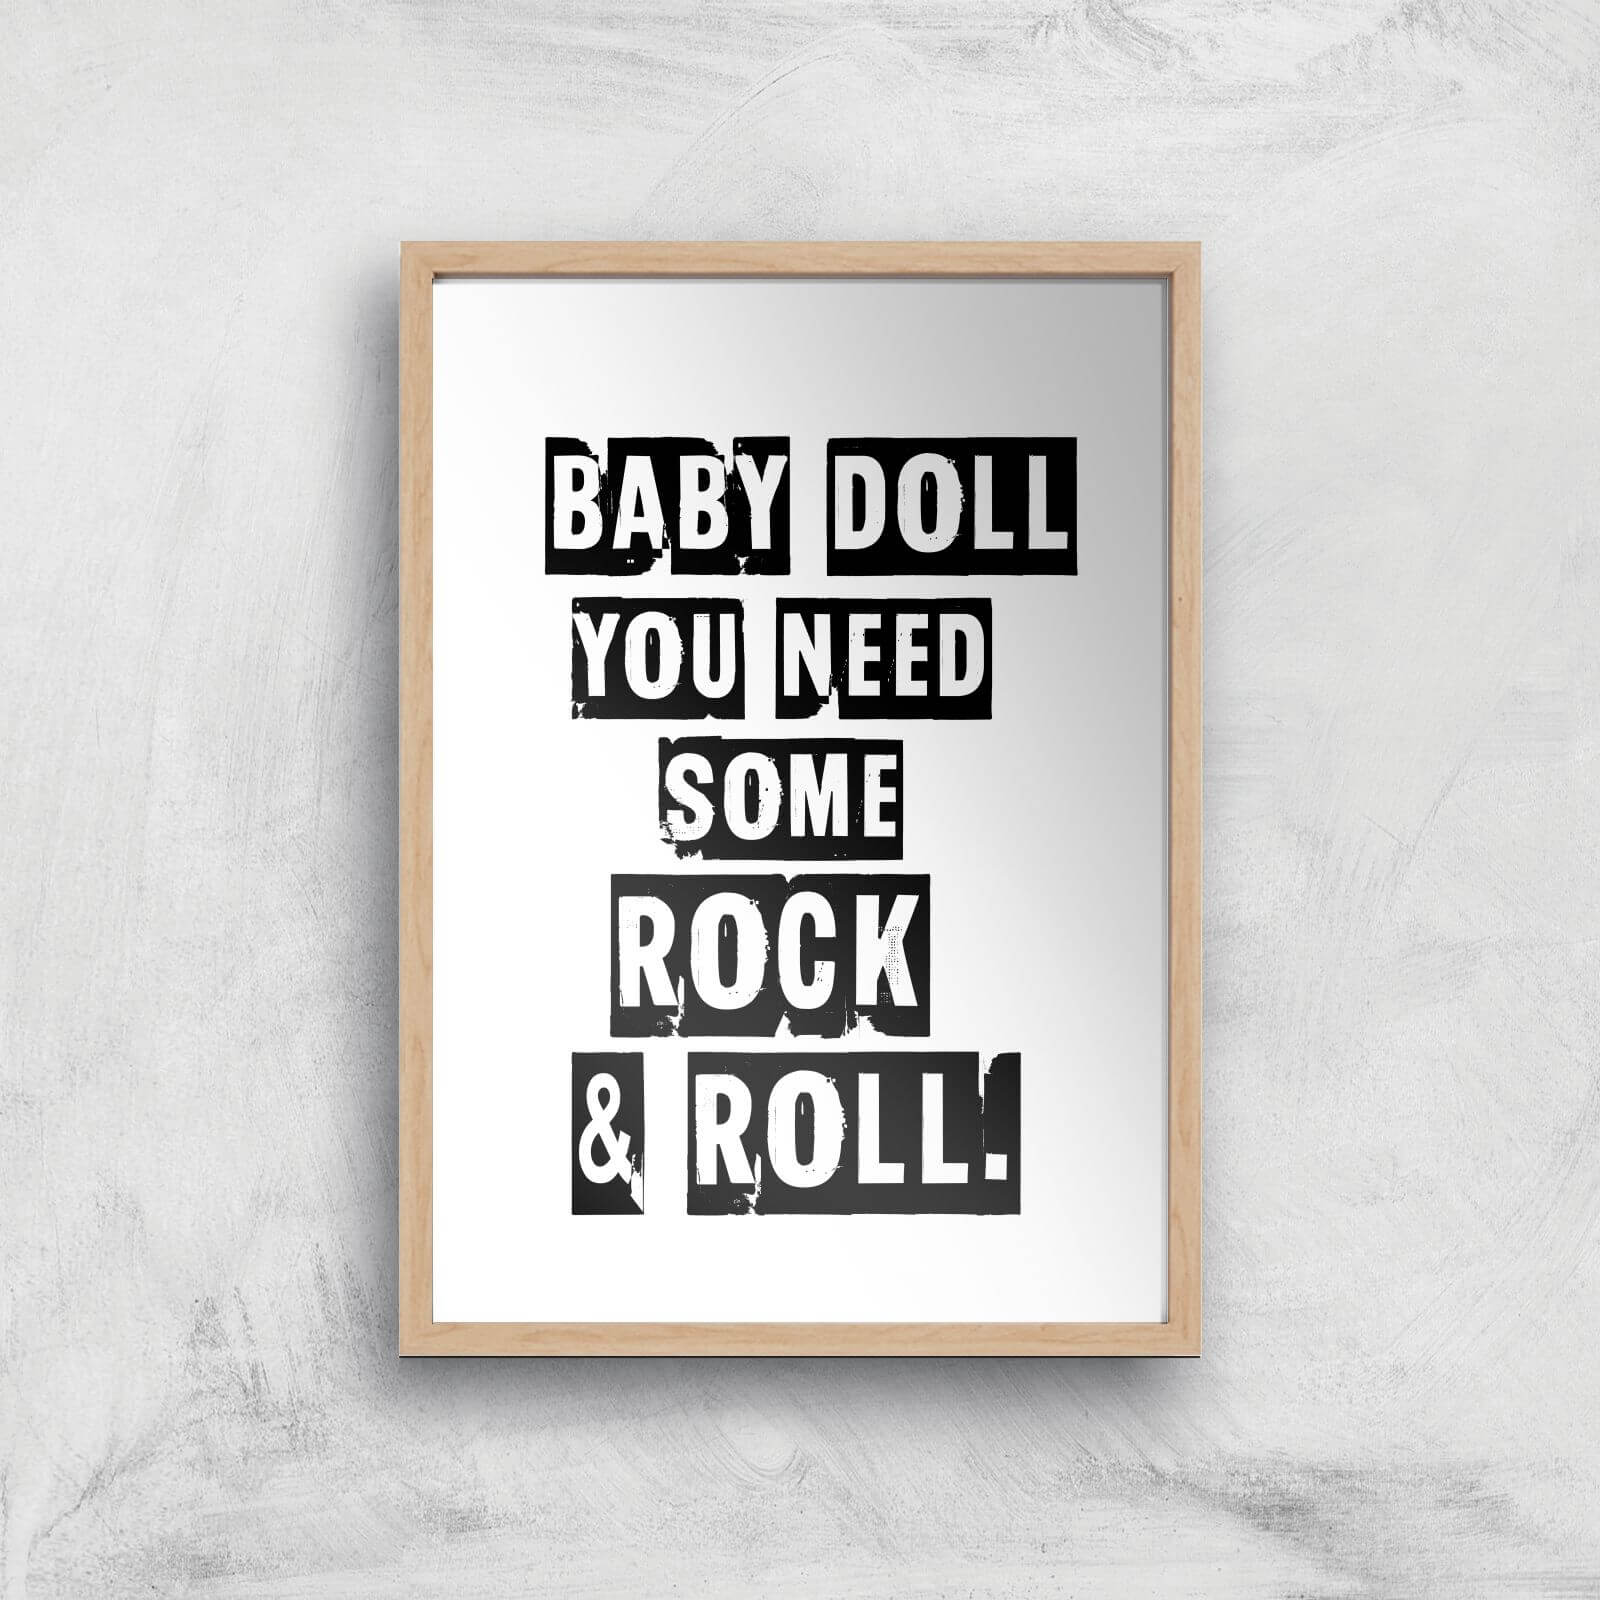 Baby Doll You Need Some Rock & Roll Giclee Art Print - A3 - Wooden Frame